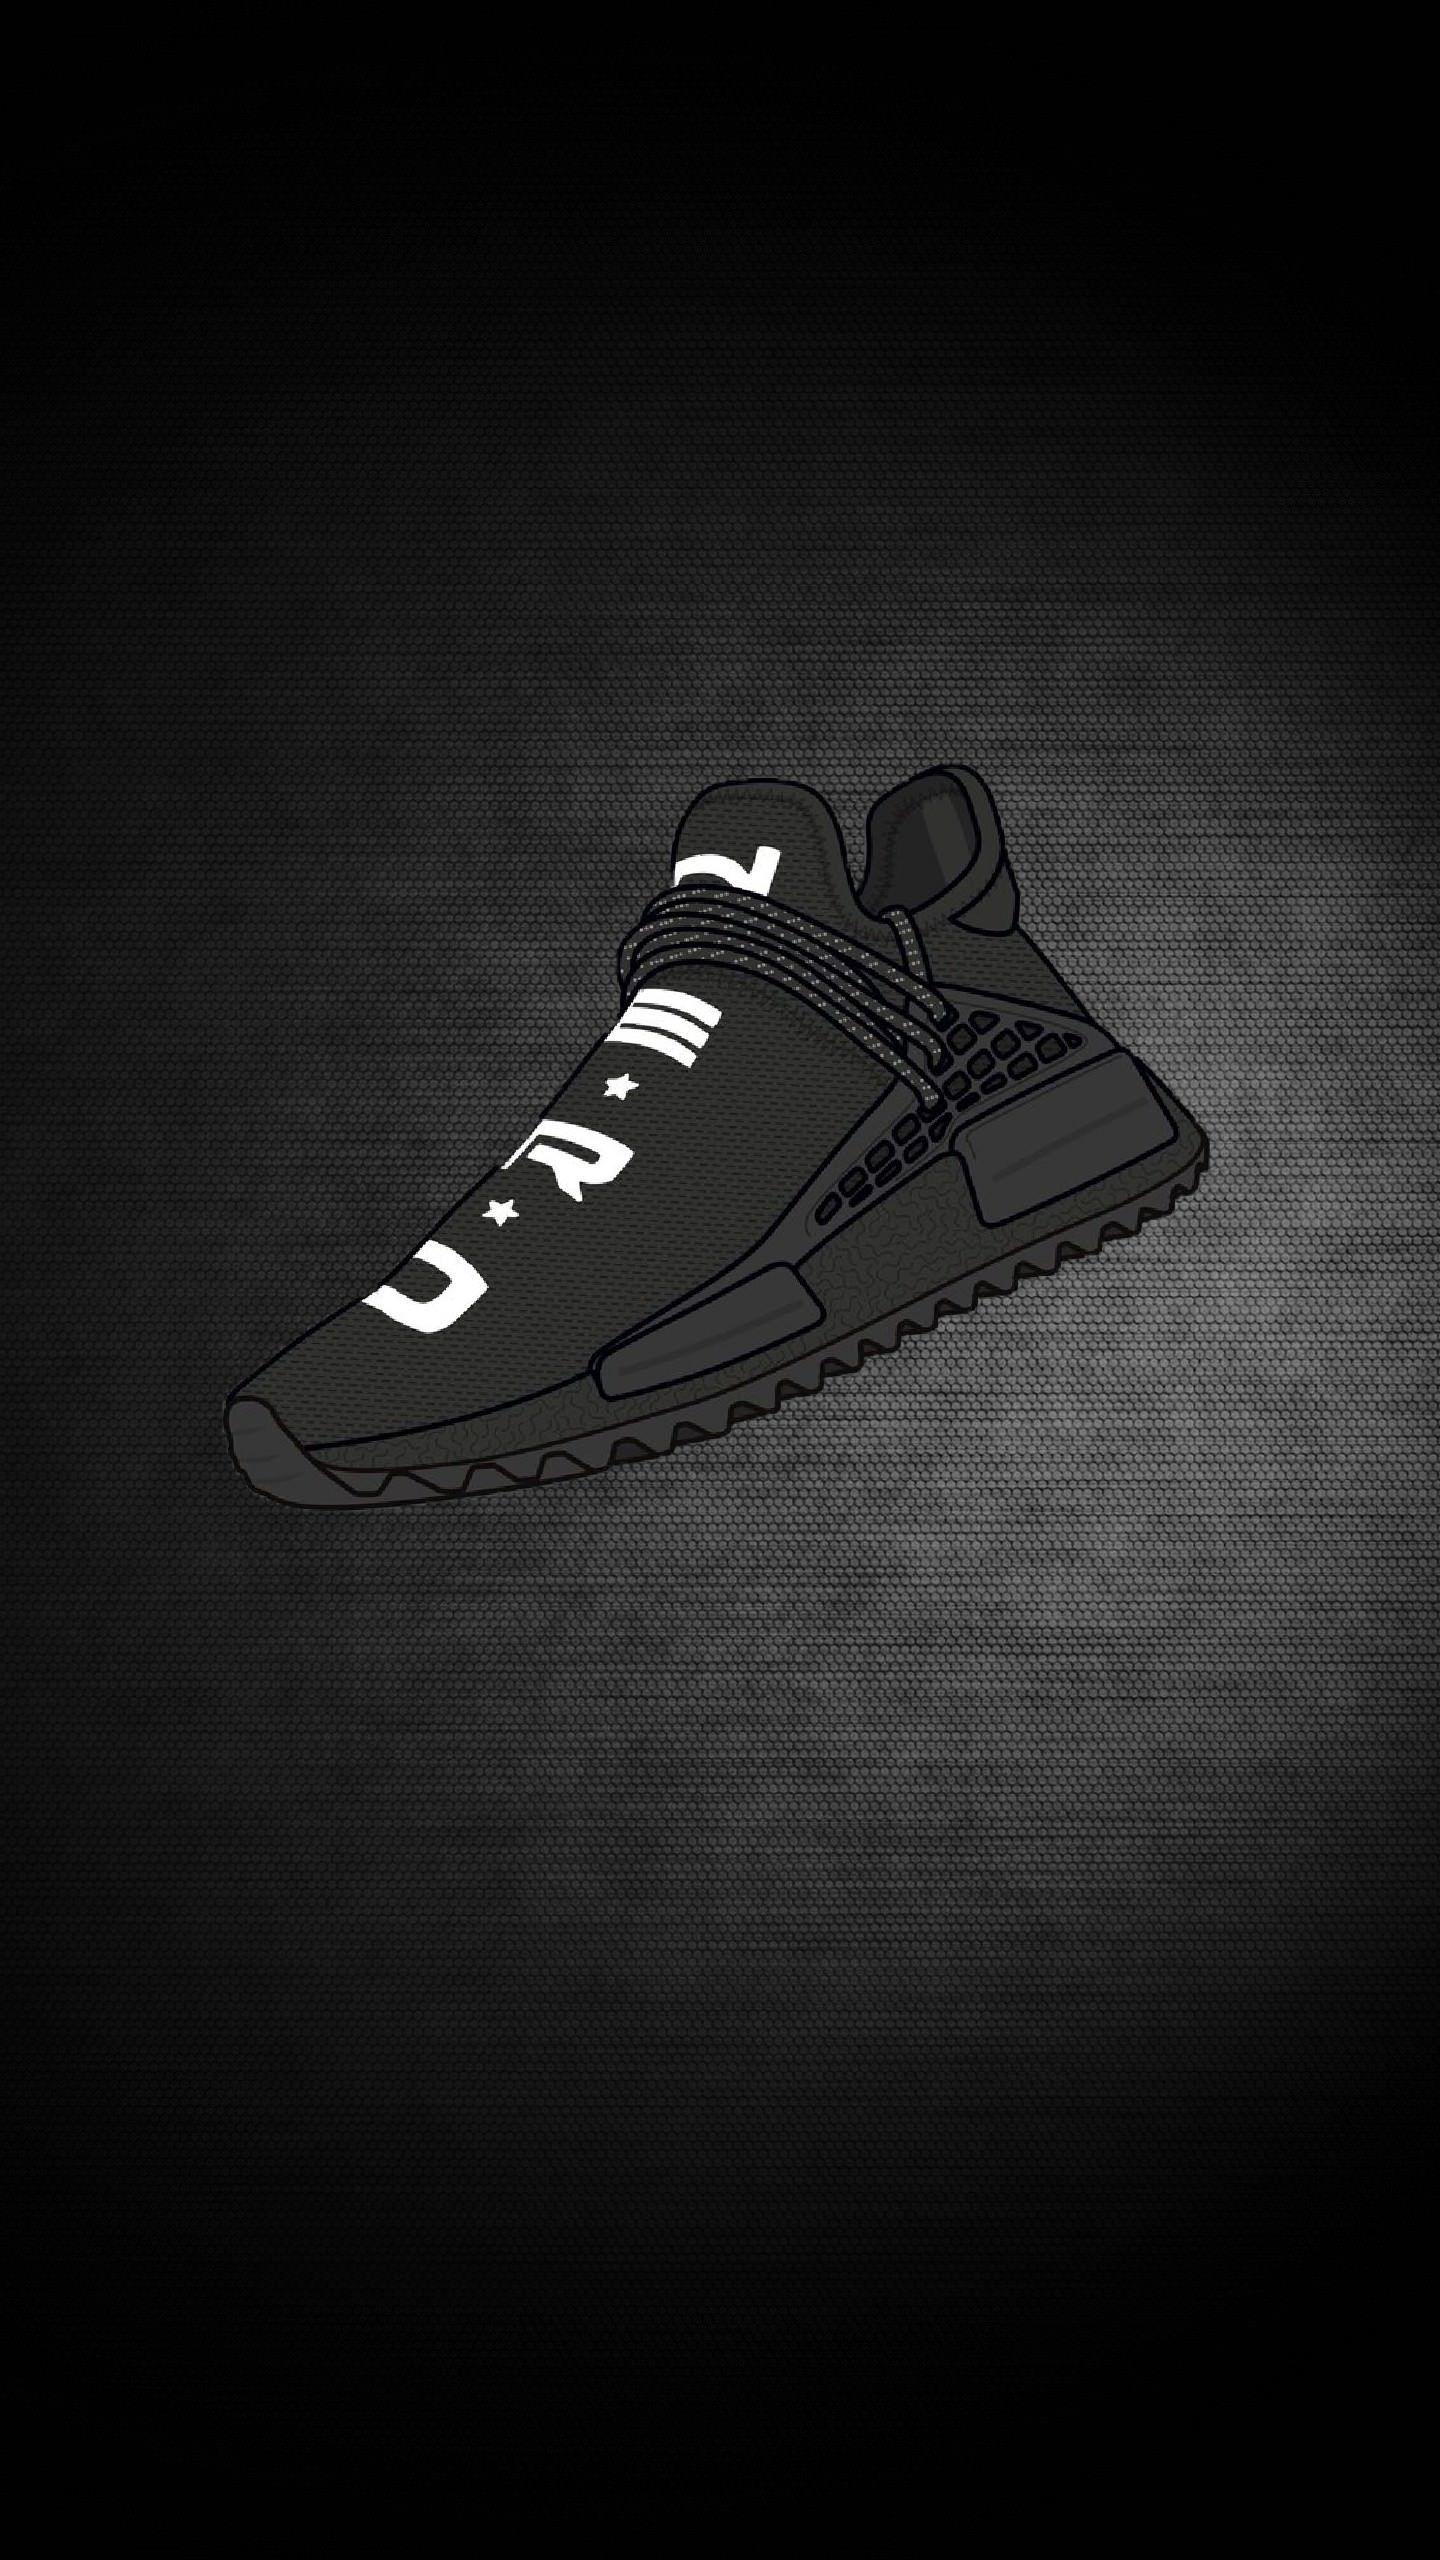 crew traffic Shine Adidas NMD Wallpapers - Wallpaper Cave